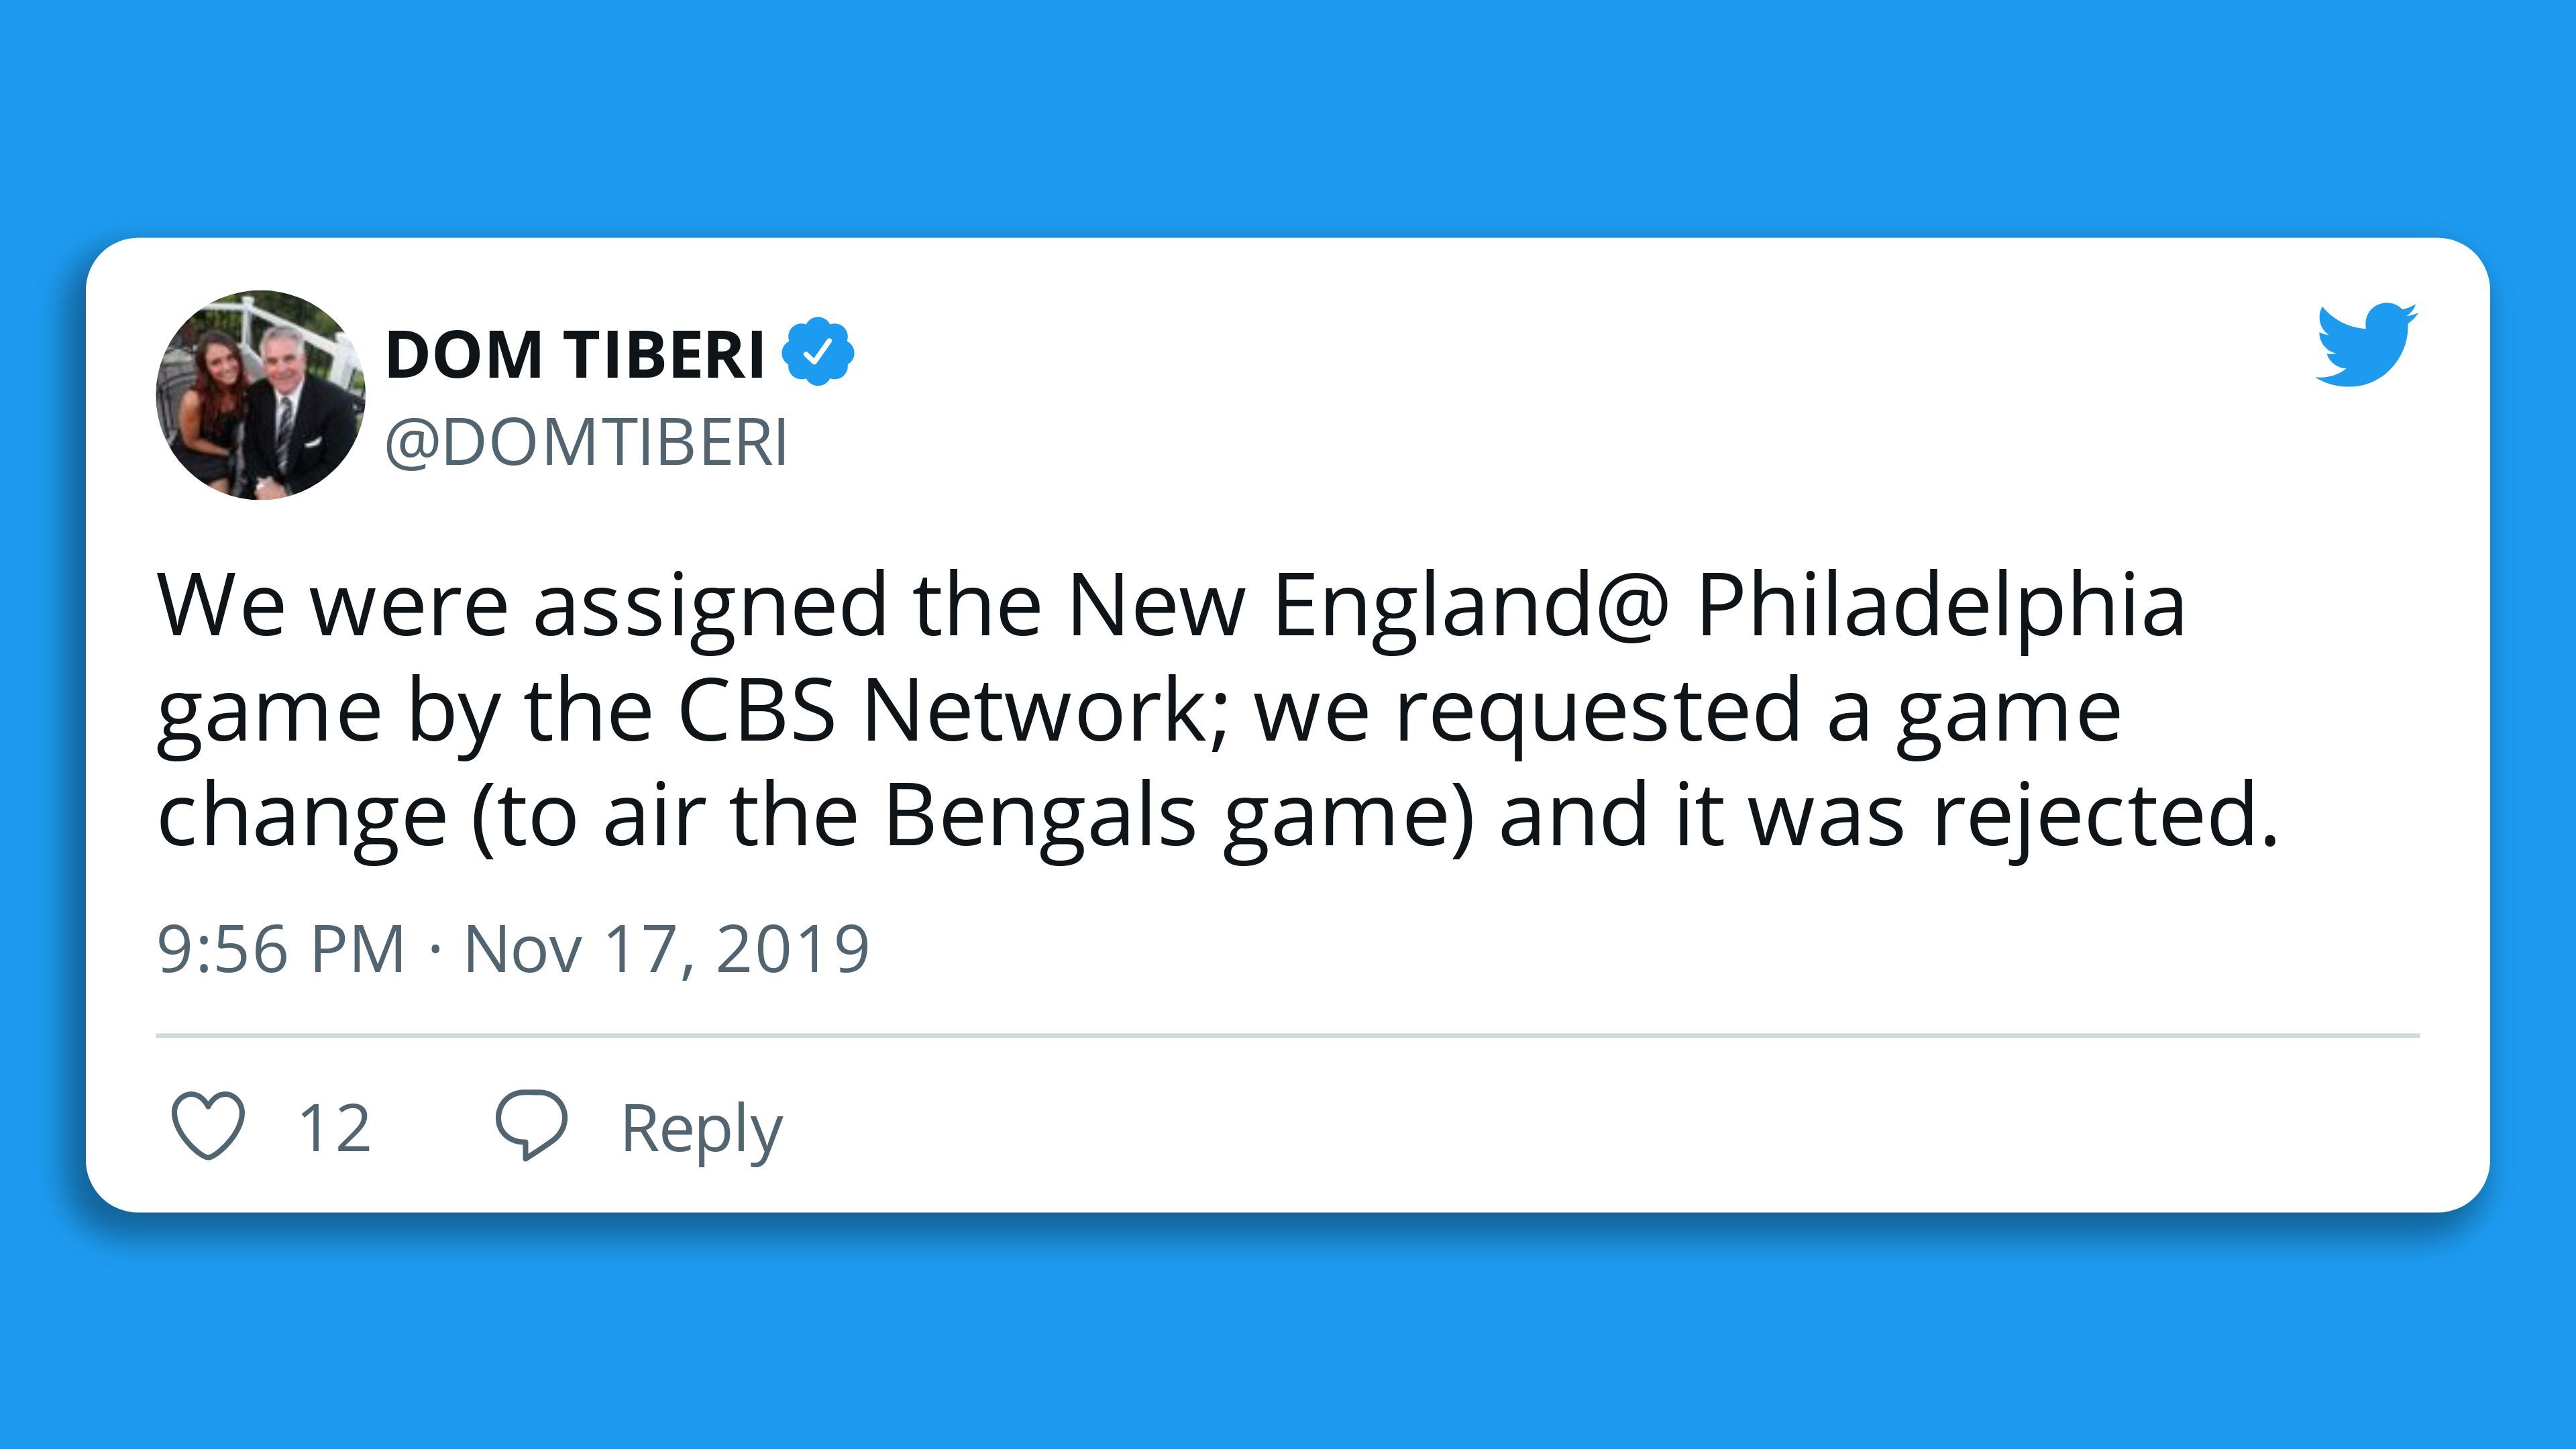 A tweet reading, "We were assigned the New England@ Philadelphia game by the CBS Network; we requested a game change (to air the Bengals game) and it was rejected."